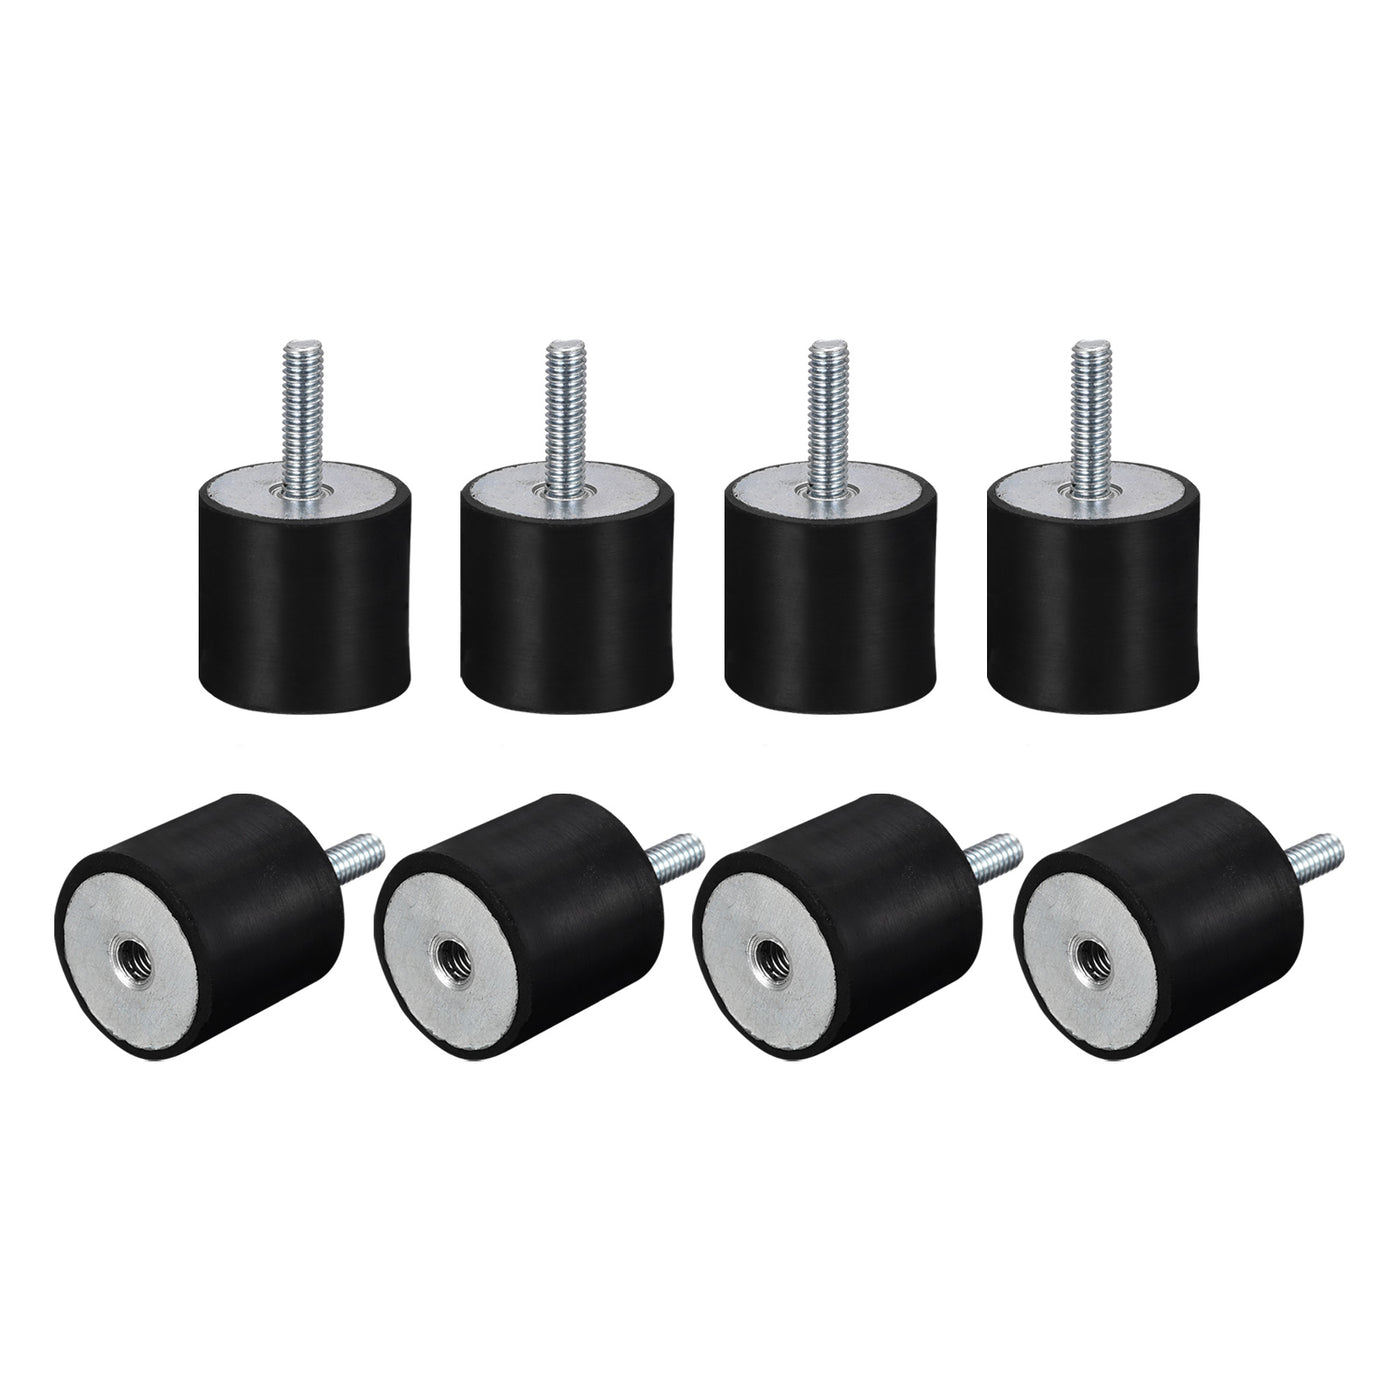 uxcell Uxcell Rubber Mount 12pcs M5 Male/Female Vibration Isolator Shock Absorber, D20mmxH15mm